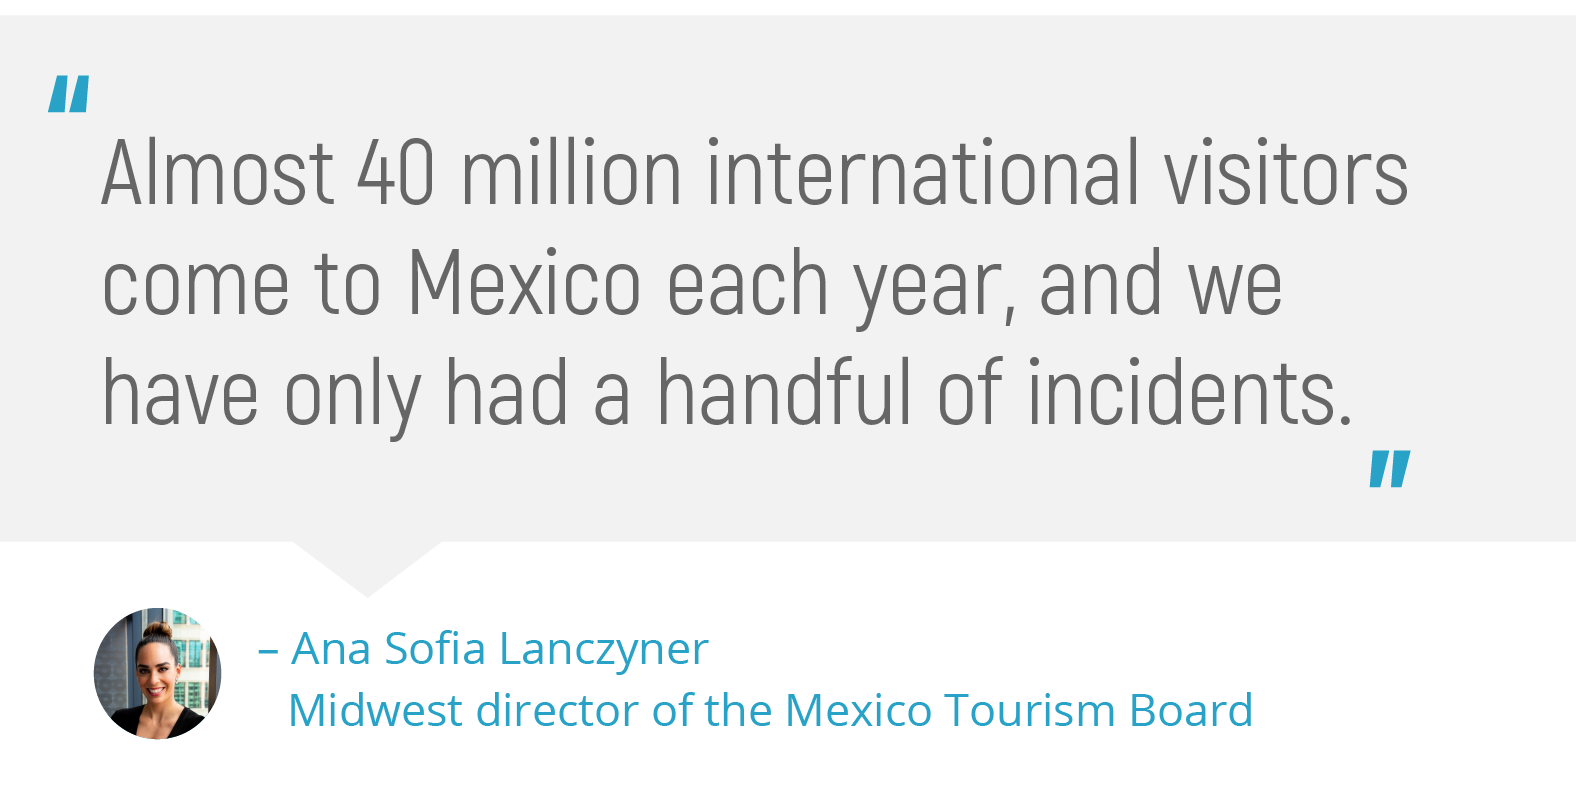 "Almost 40 million international visitors come to Mexico each year, and we have only had a handful of incidents."